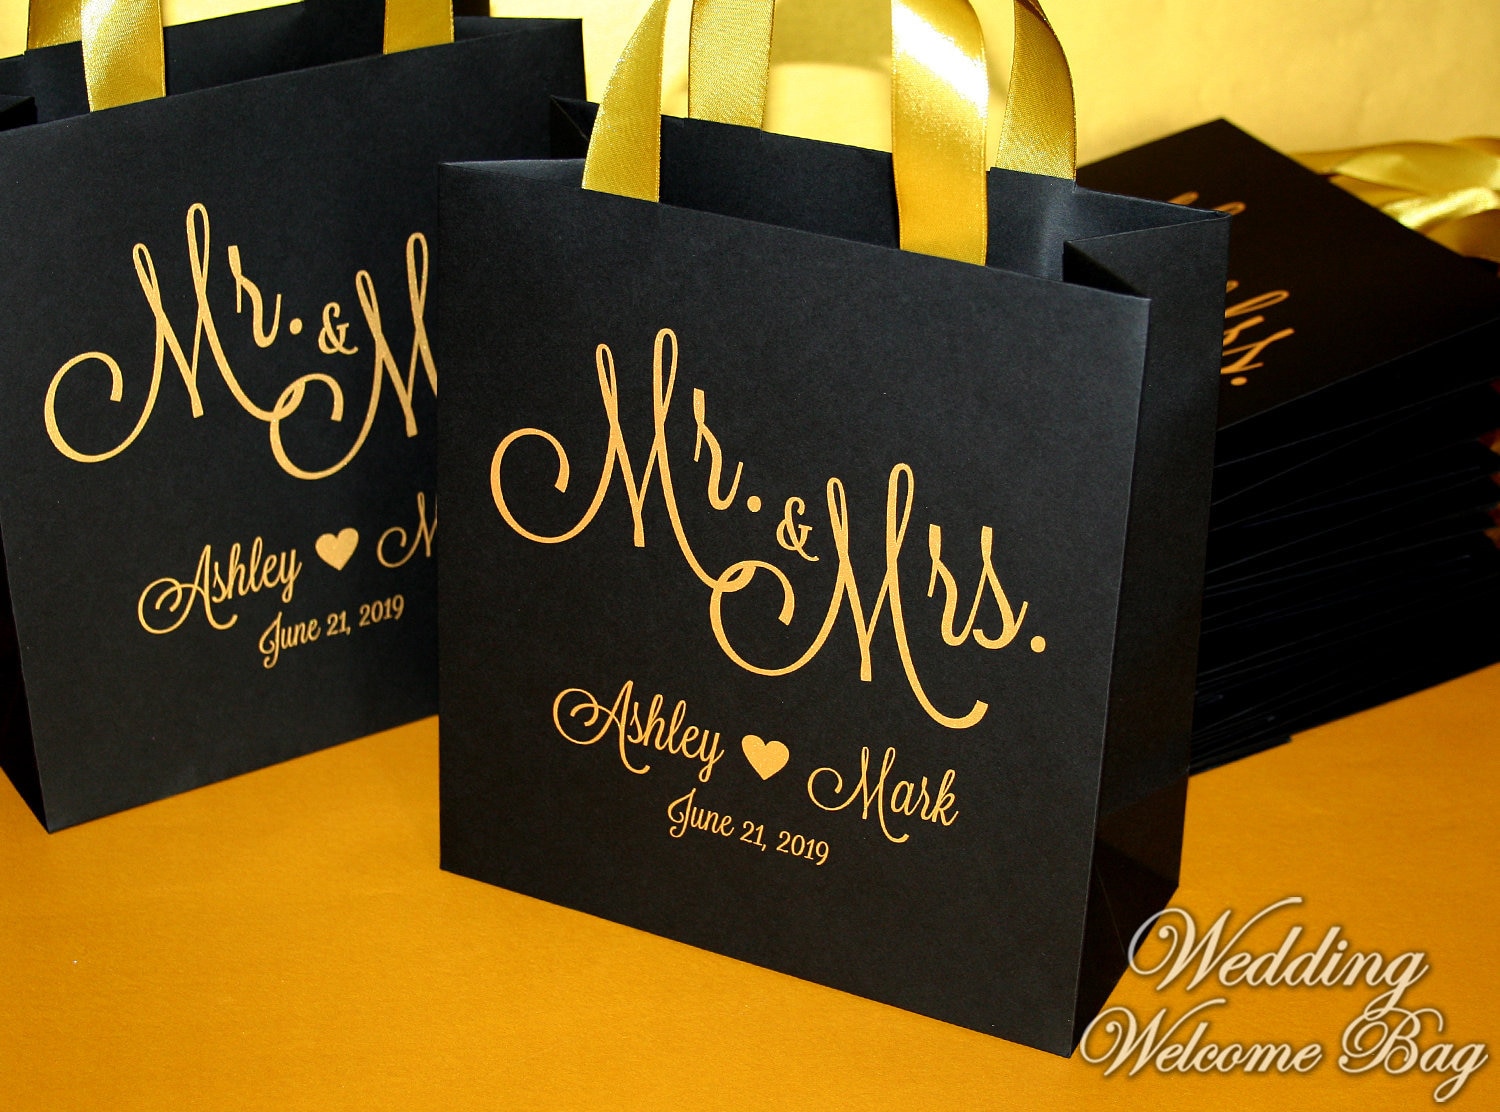 personalized wedding gift bags